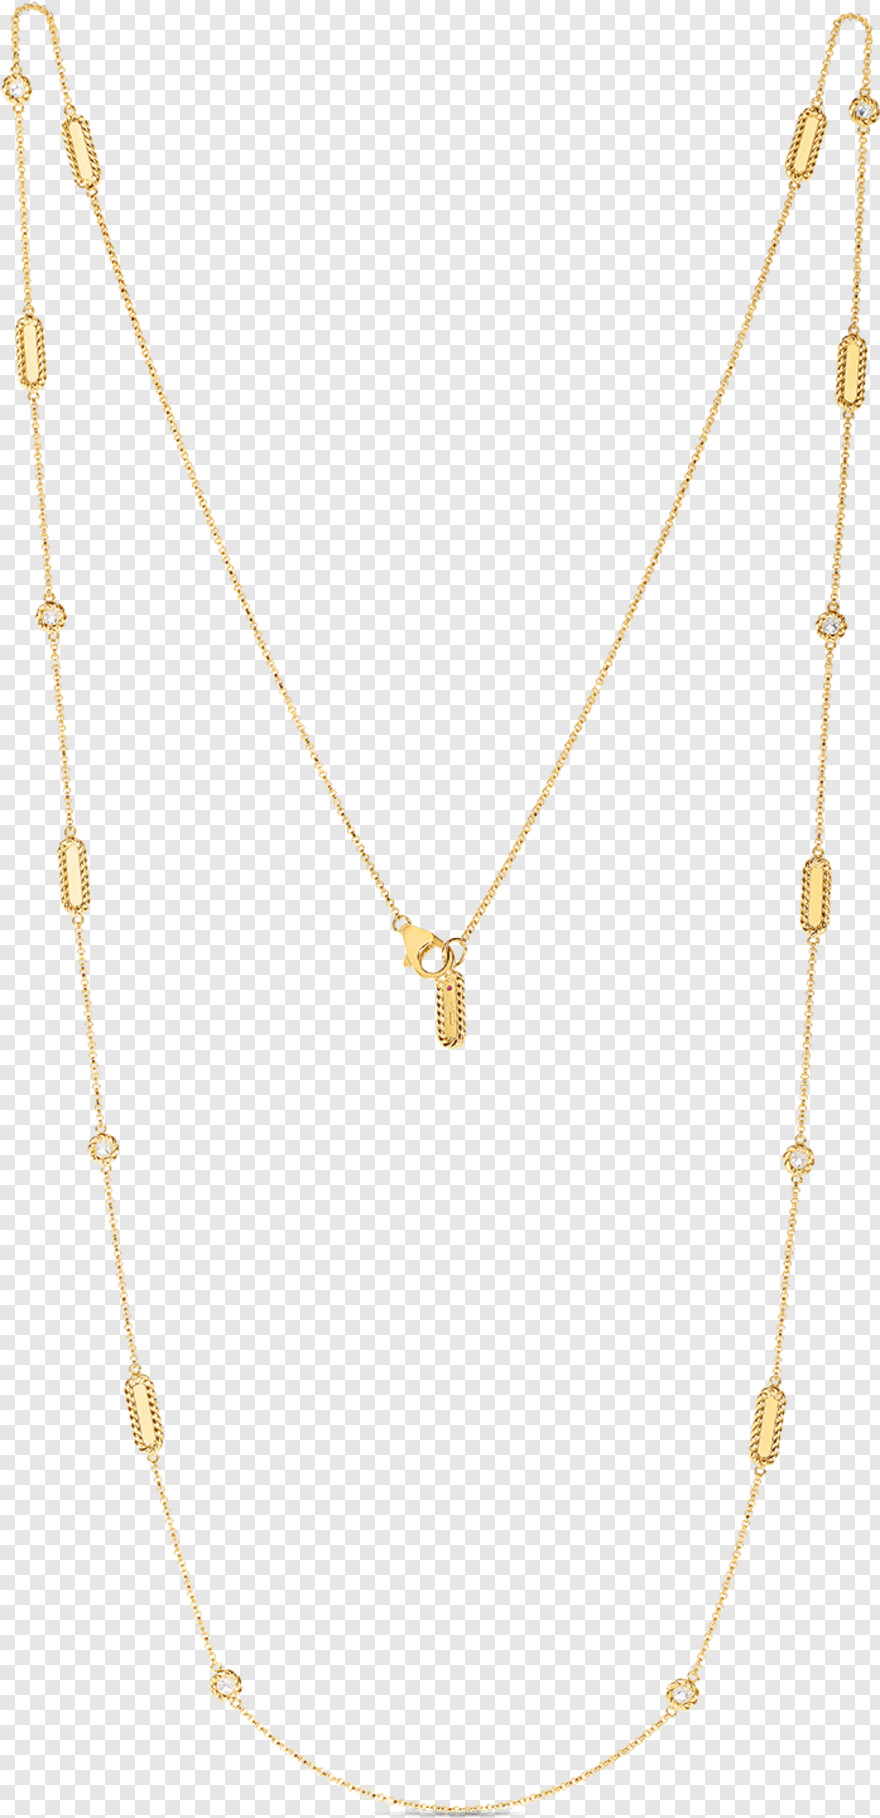 necklace # 531858